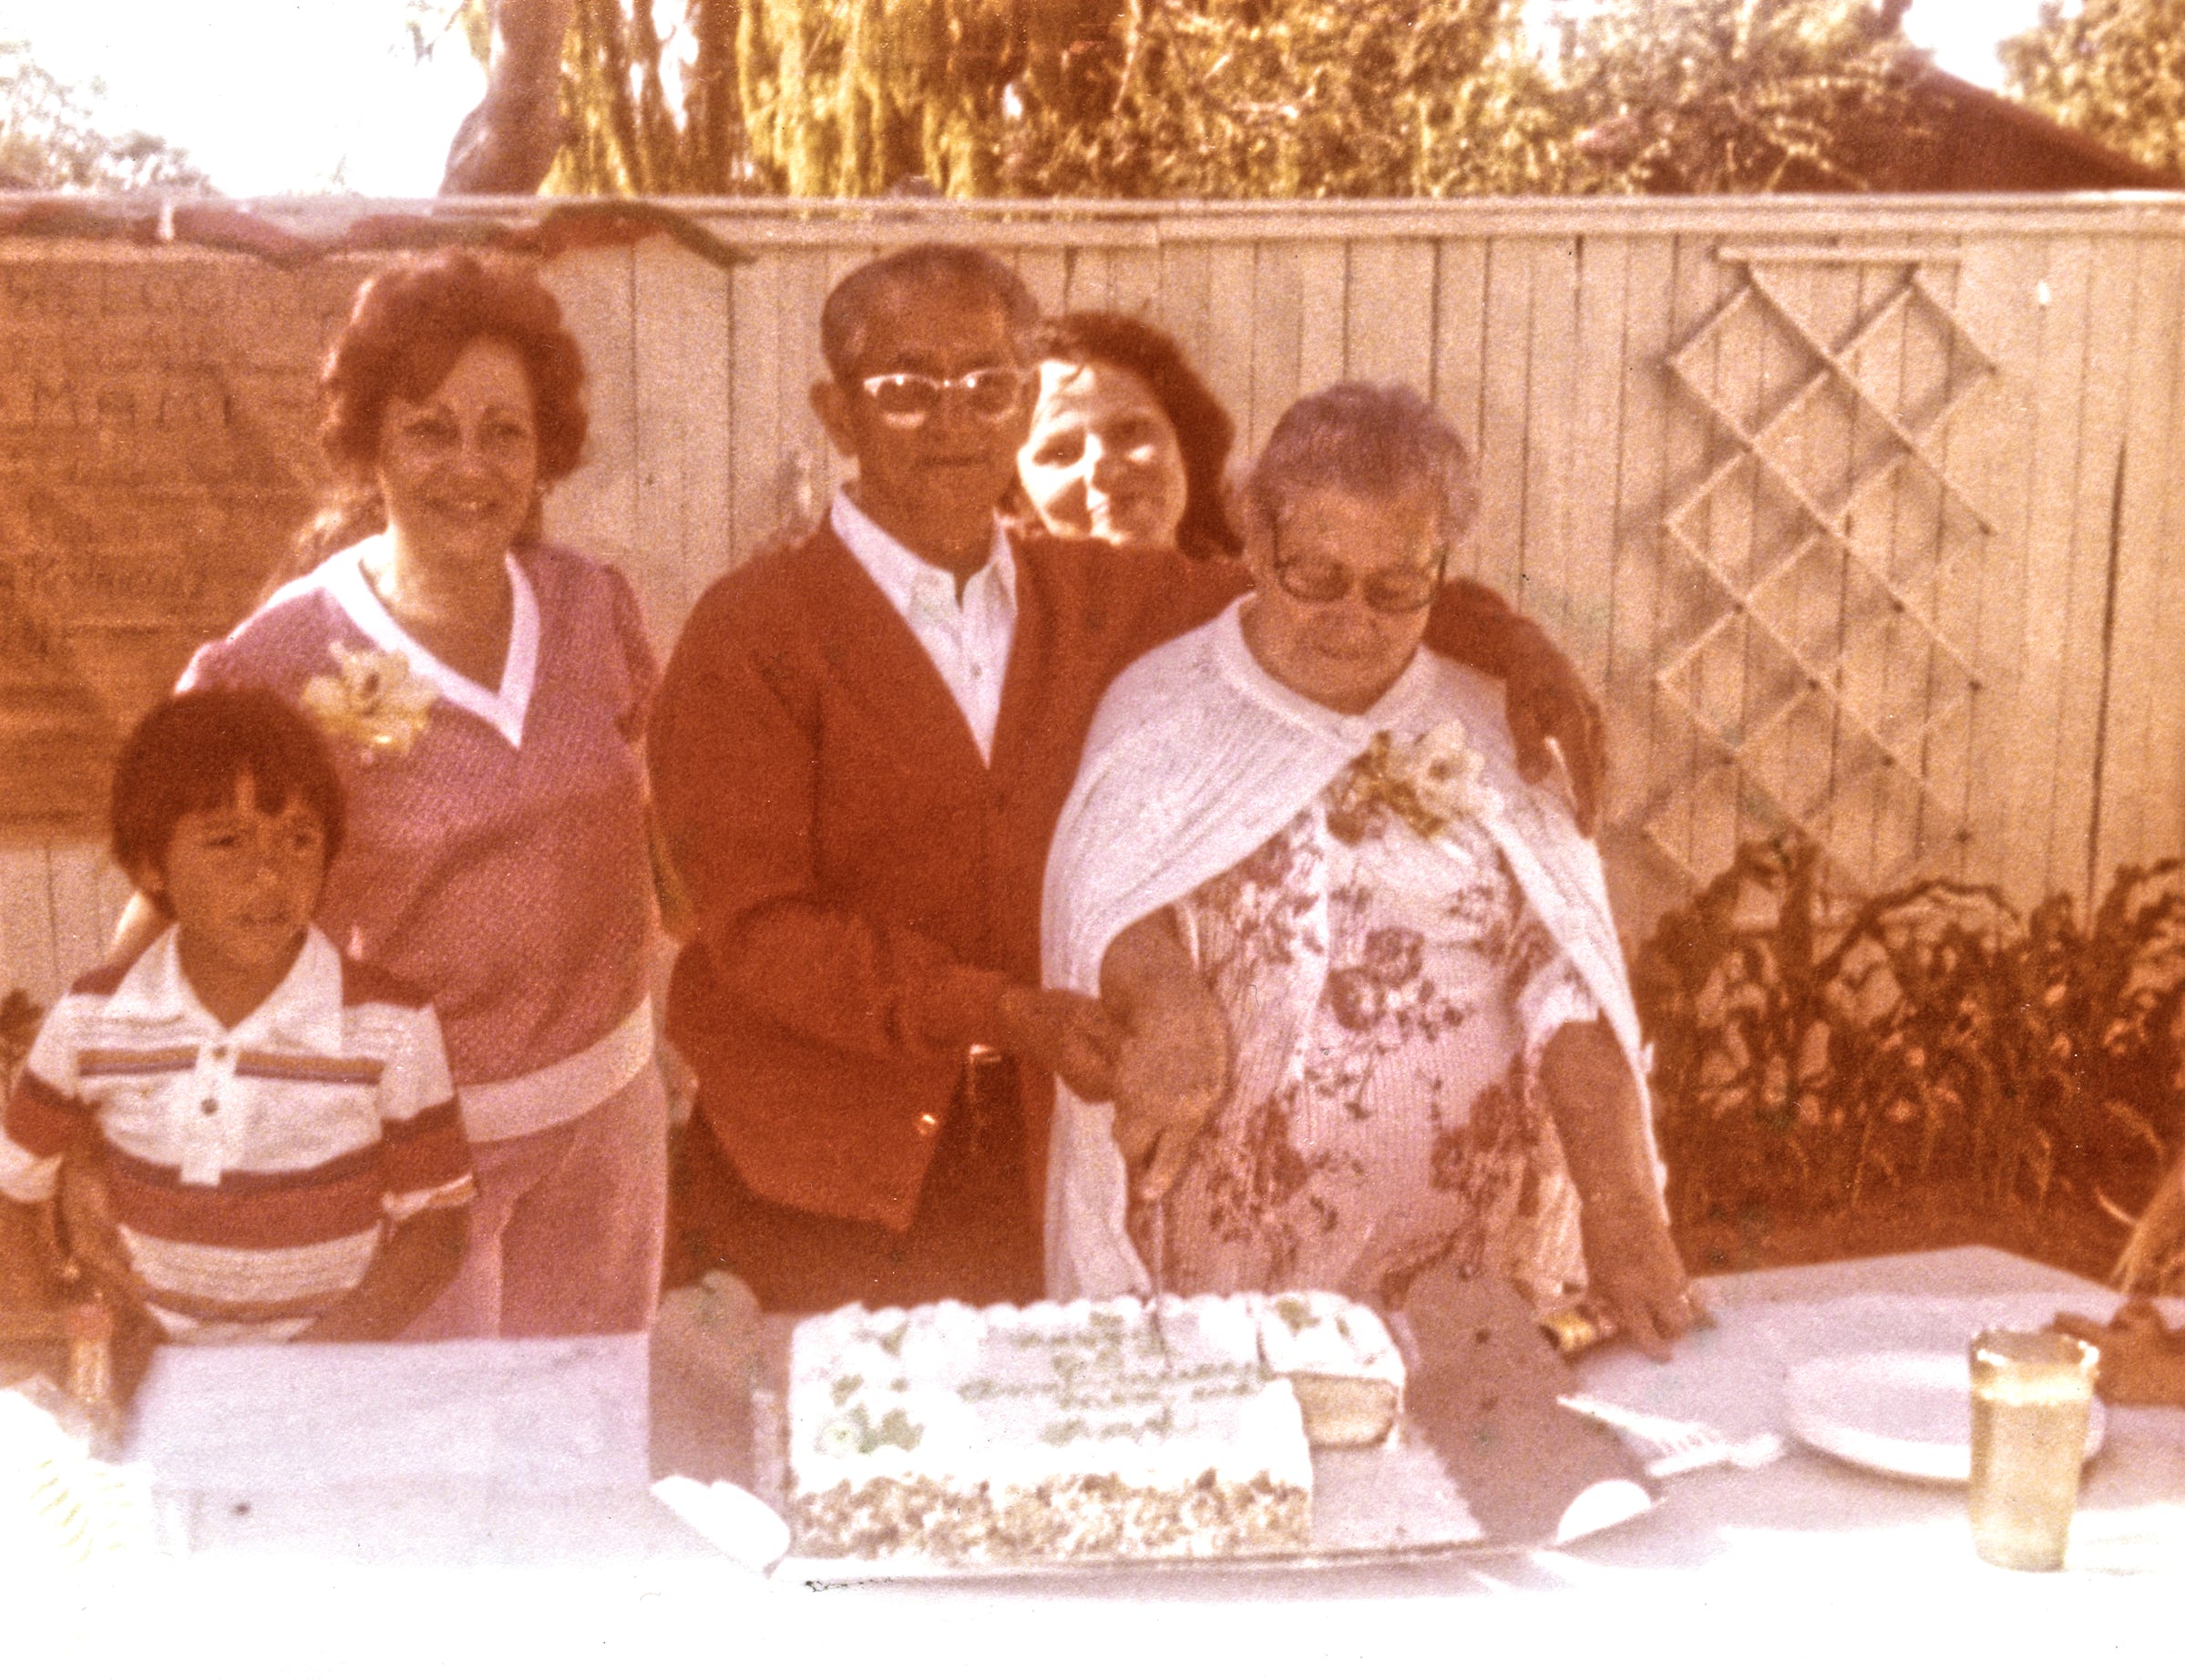 50th anniversary picture of my folks. Taken in Santa Ana CA.